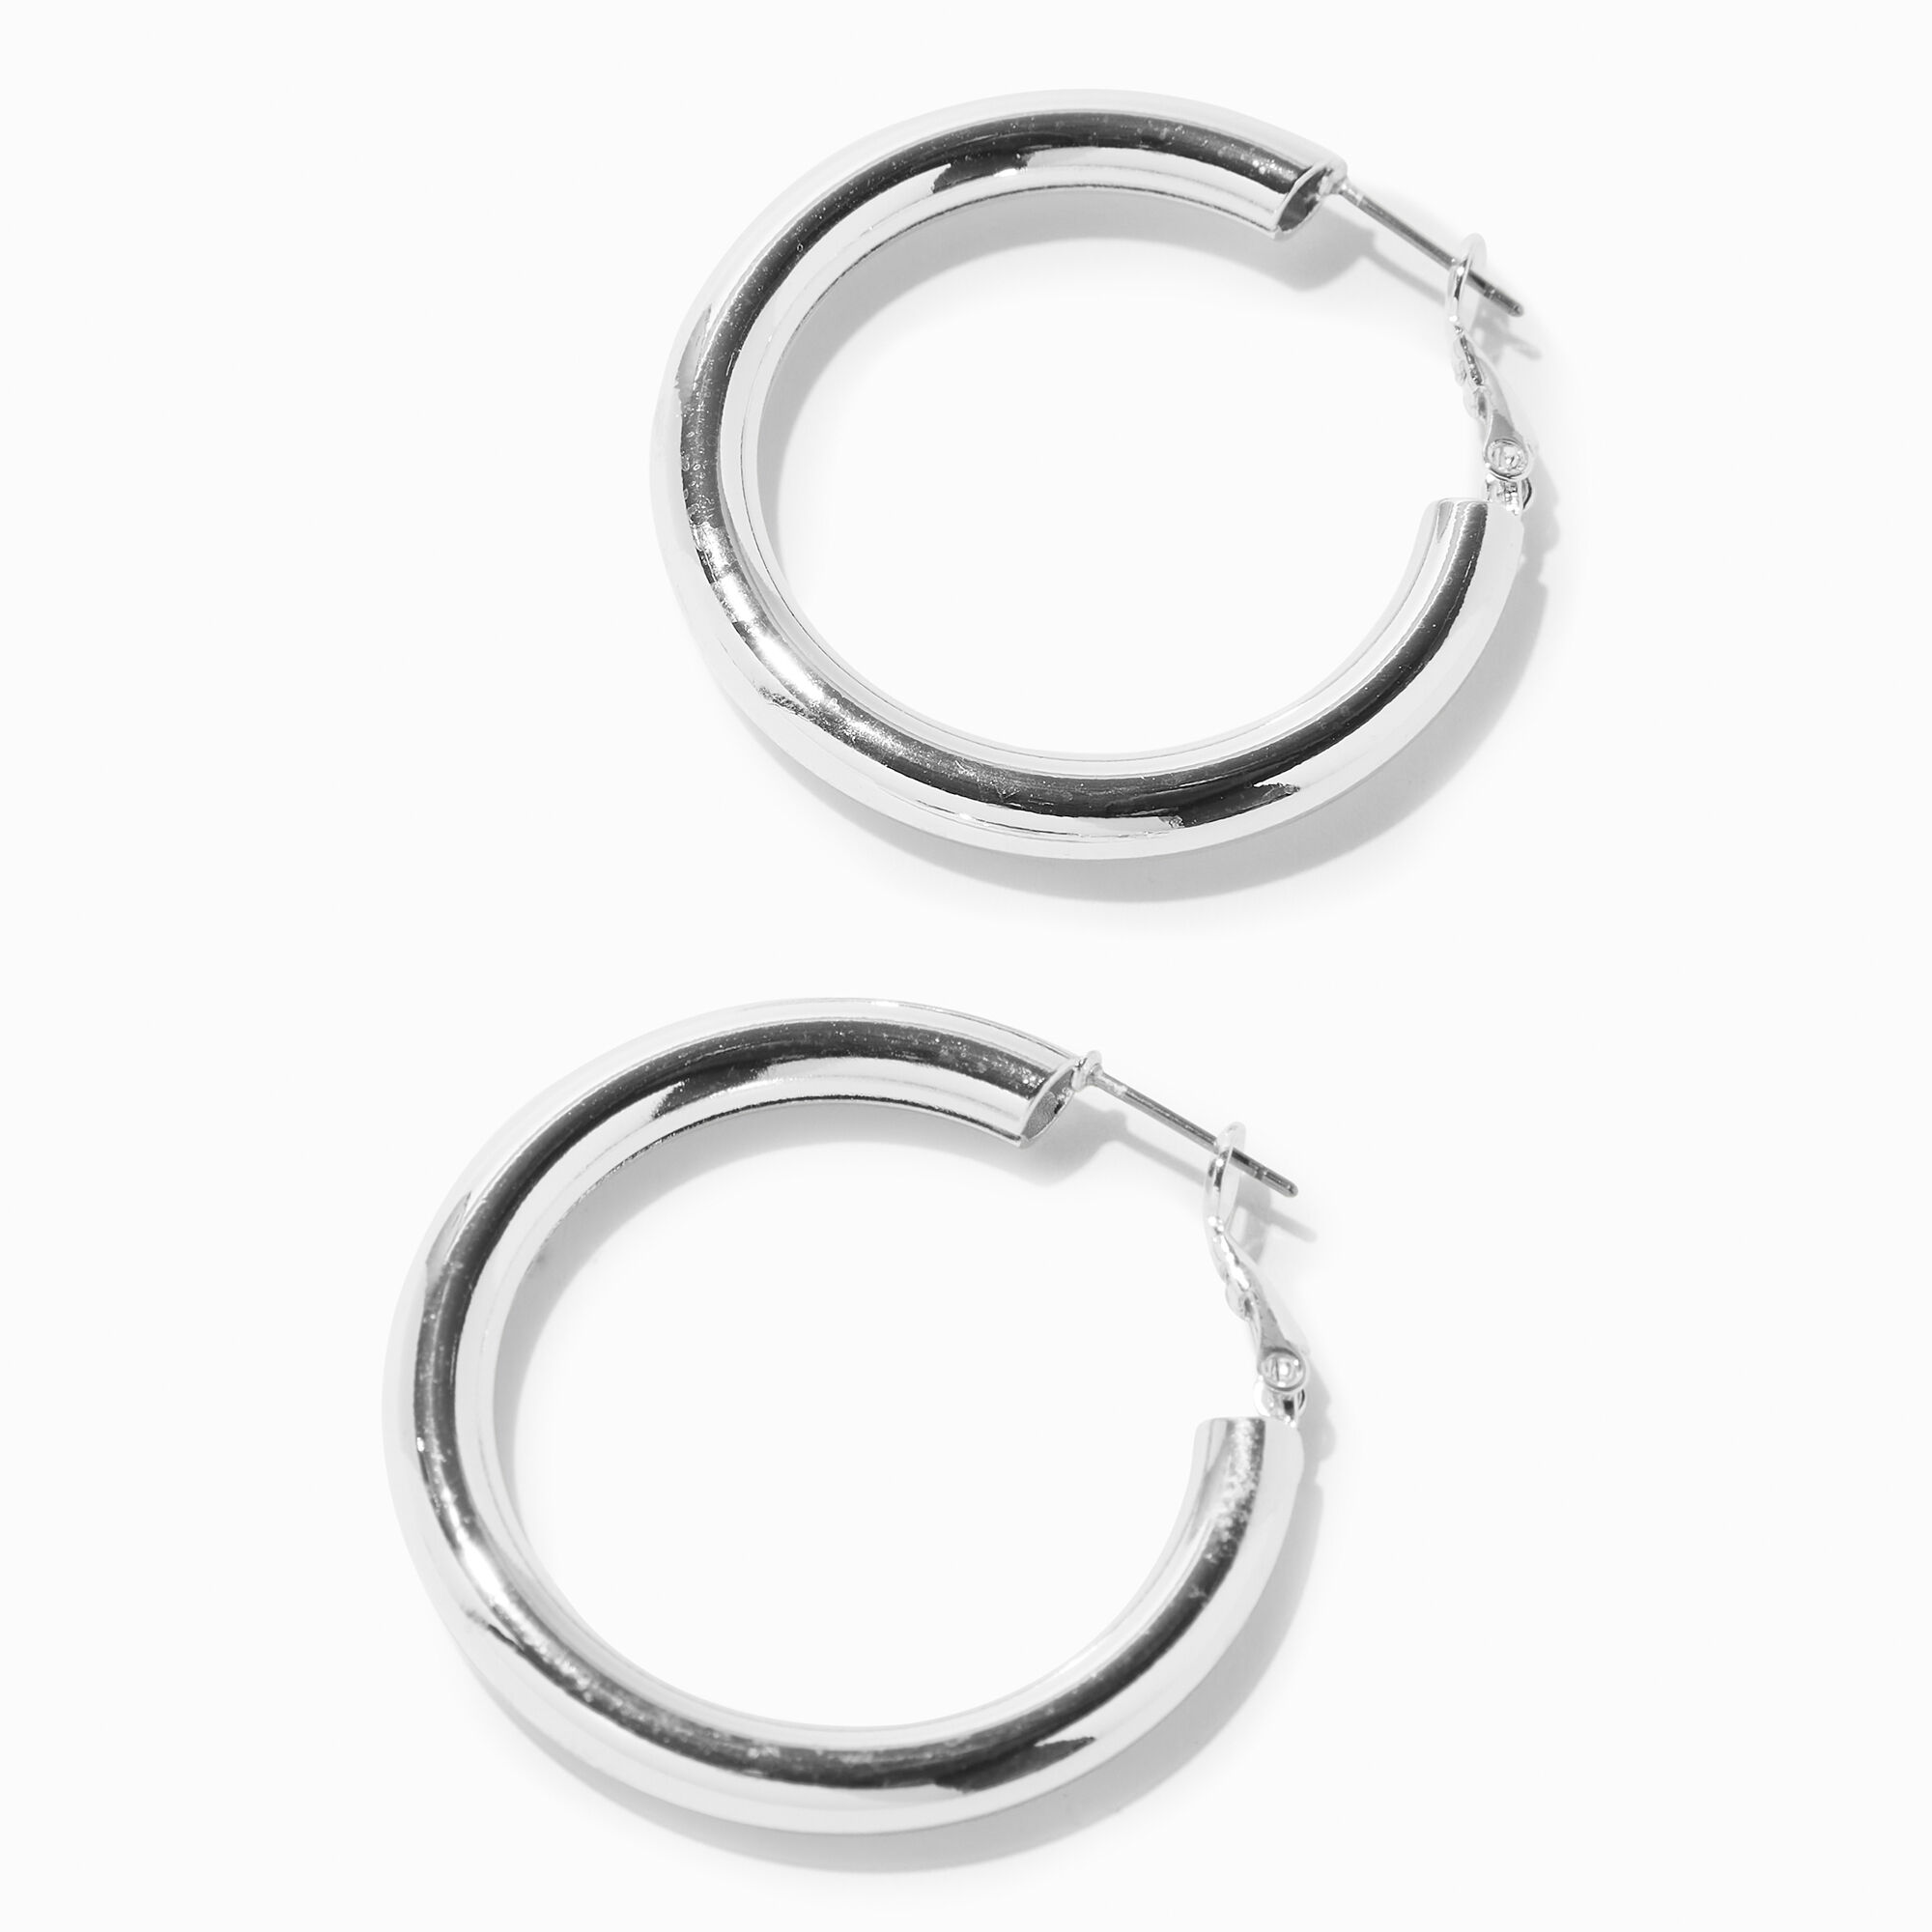 View C Luxe By Claires 30MM Tube Hoop Earrings Silver information